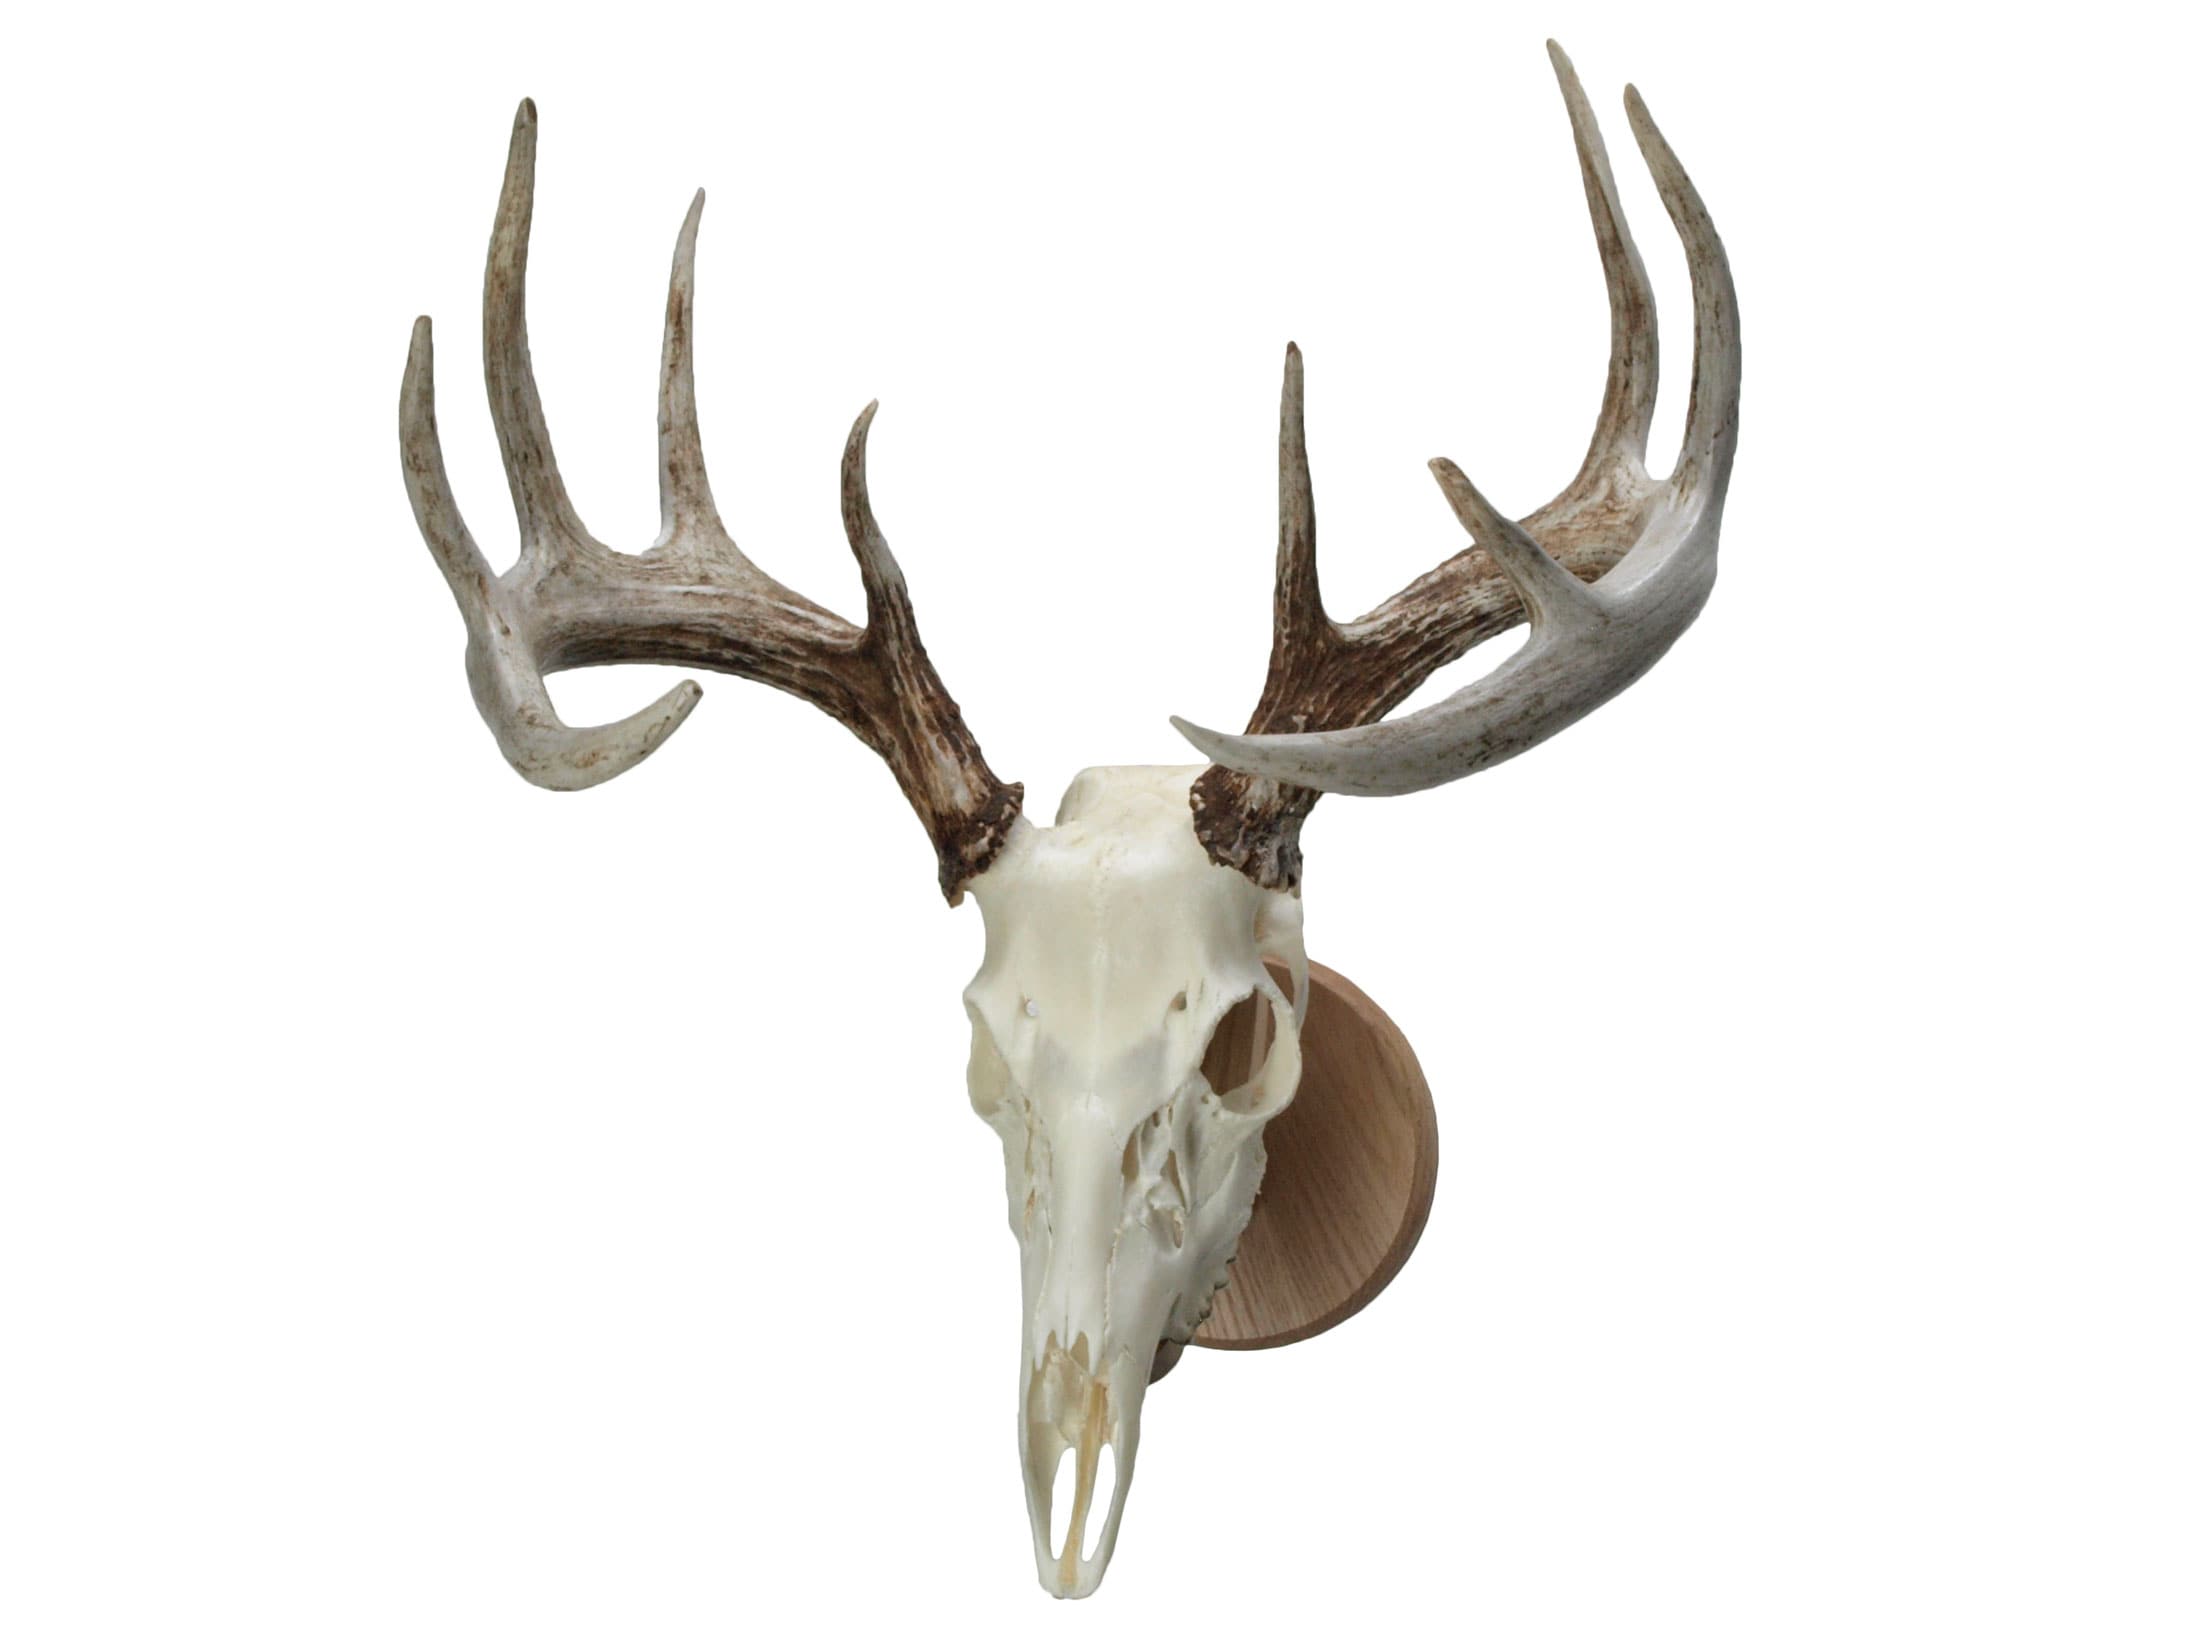 Walnut Hollow Country Deluxe Antler Display Mounting Kit In Solid Oak For Mule Deer Whitetail Deer Home Kitchen Wall Sculptures Eudirect78 Eu